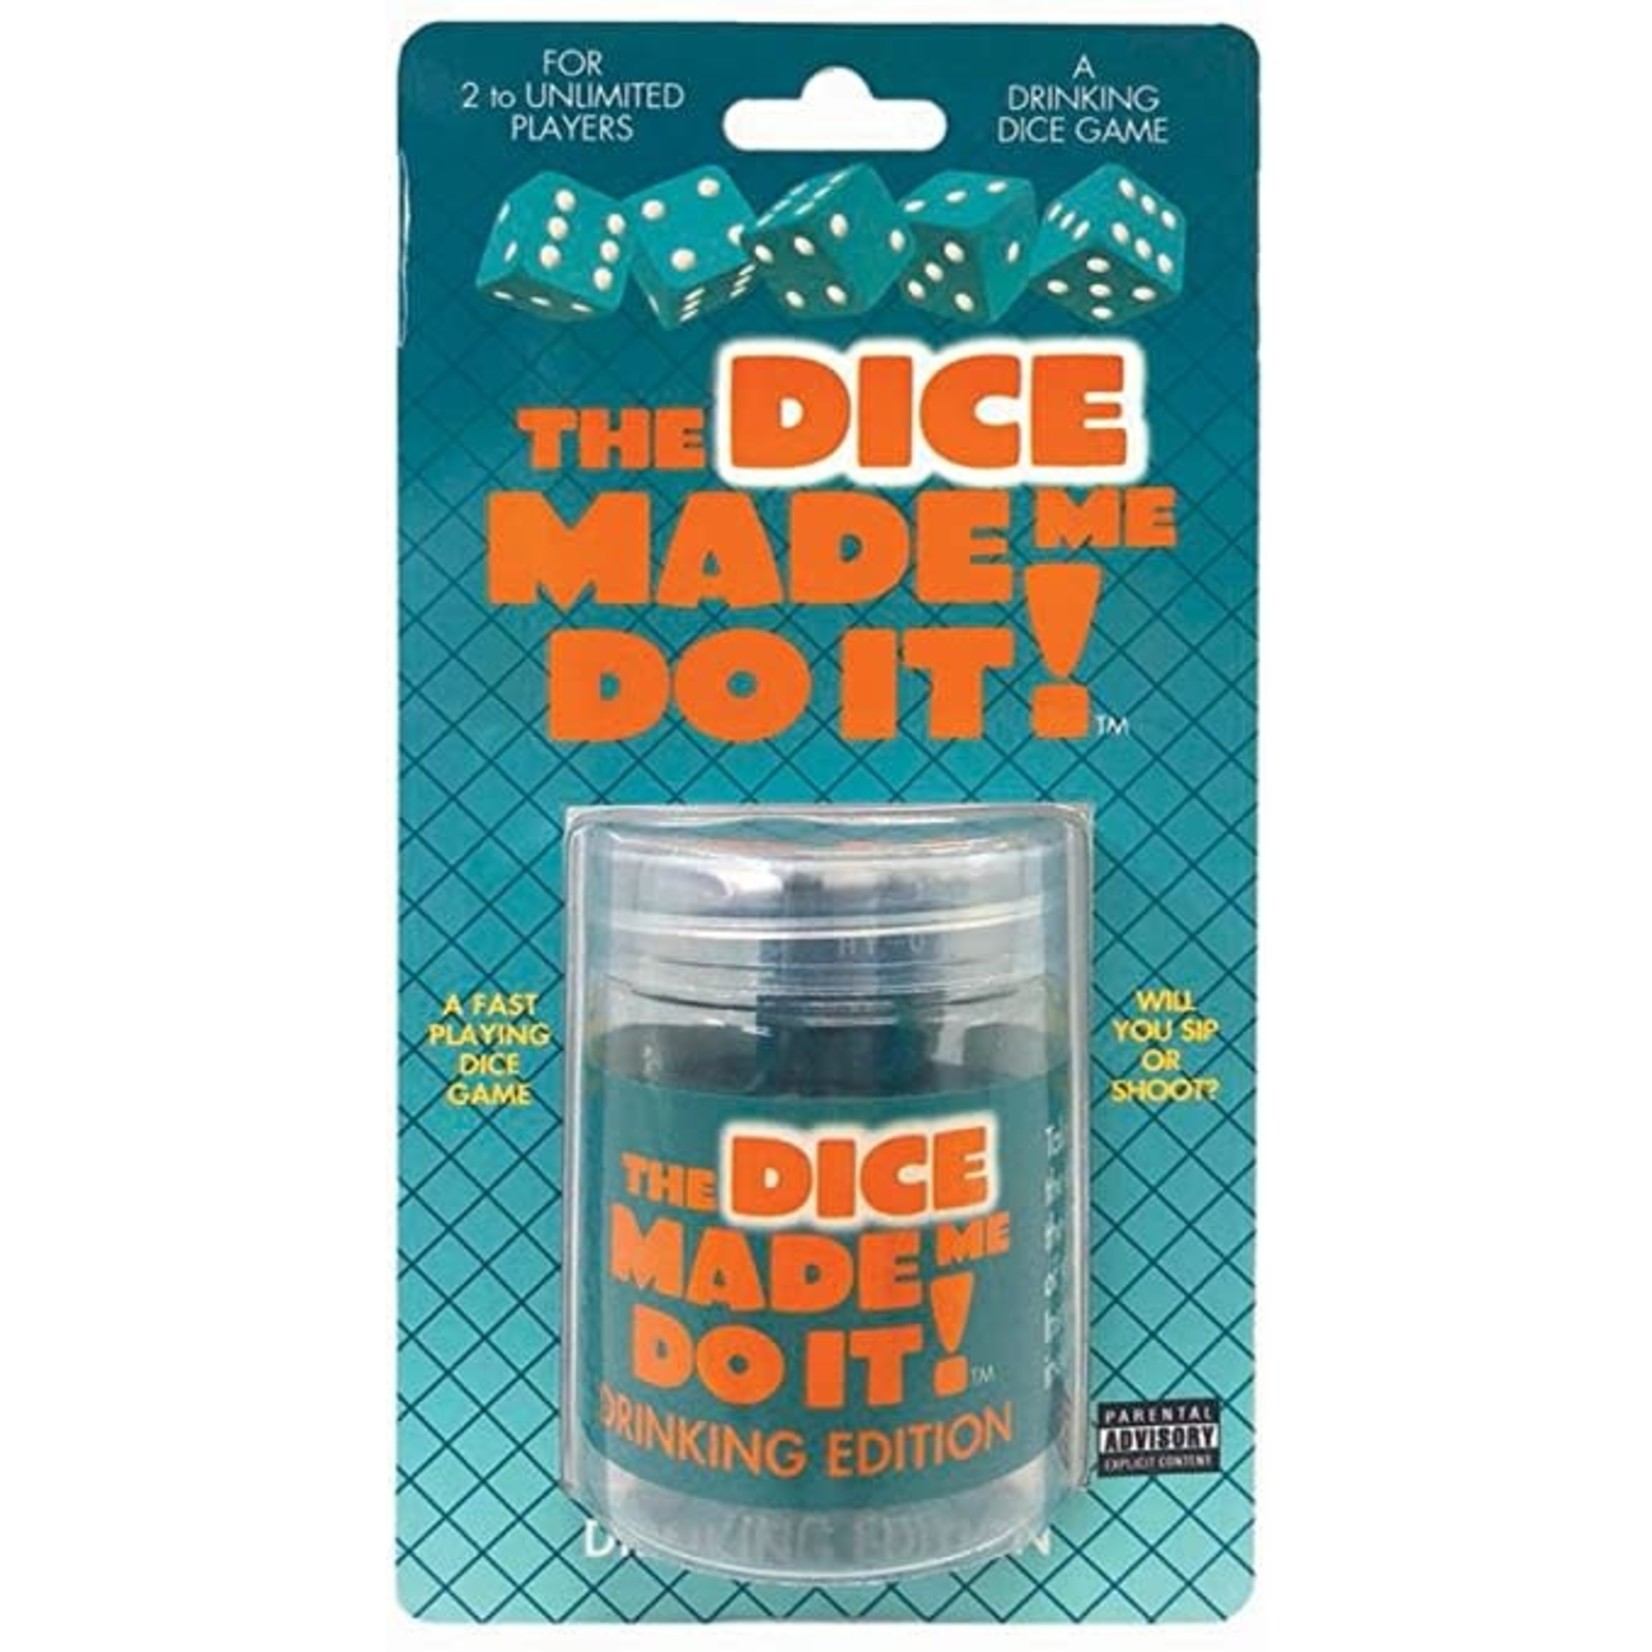 THE DICE MADE ME DO IT DICE GAME DRINKING EDITION